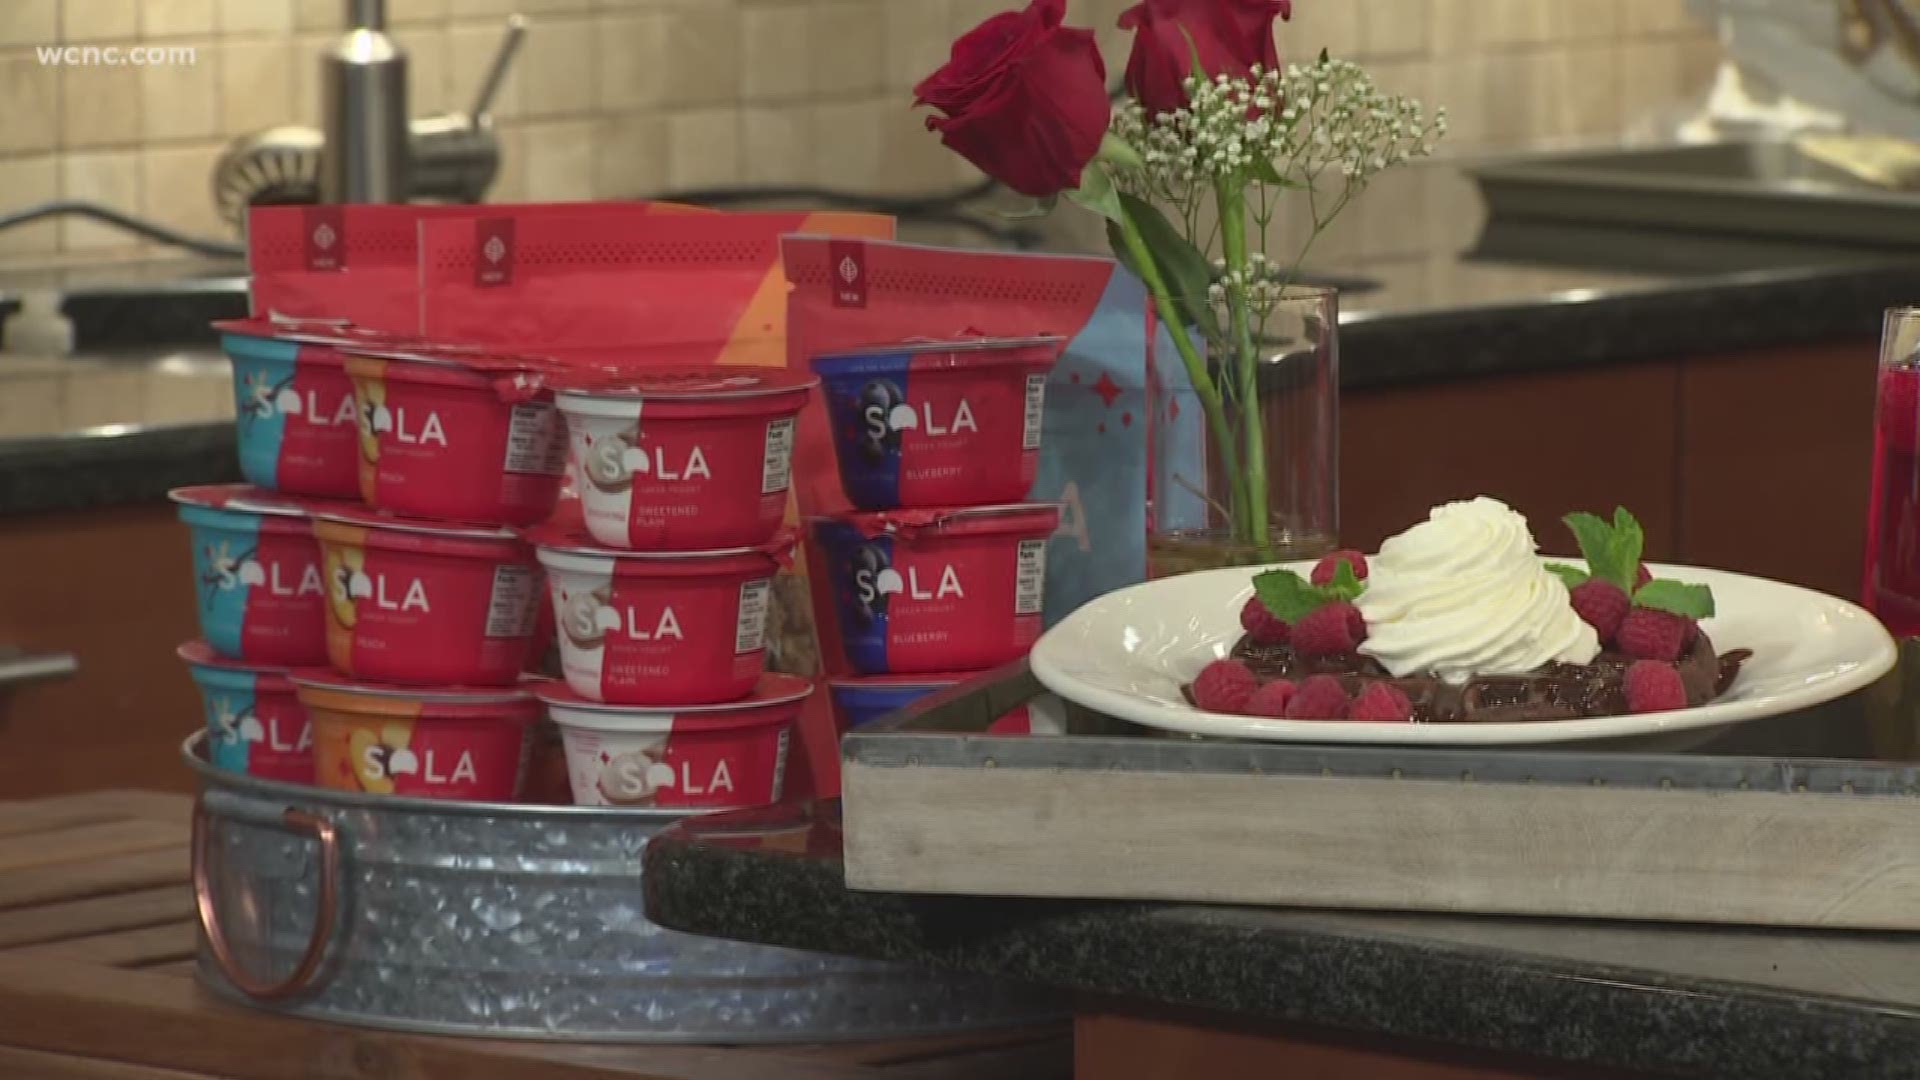 Chef Ryan Turner shares his Sola recipe for waffles